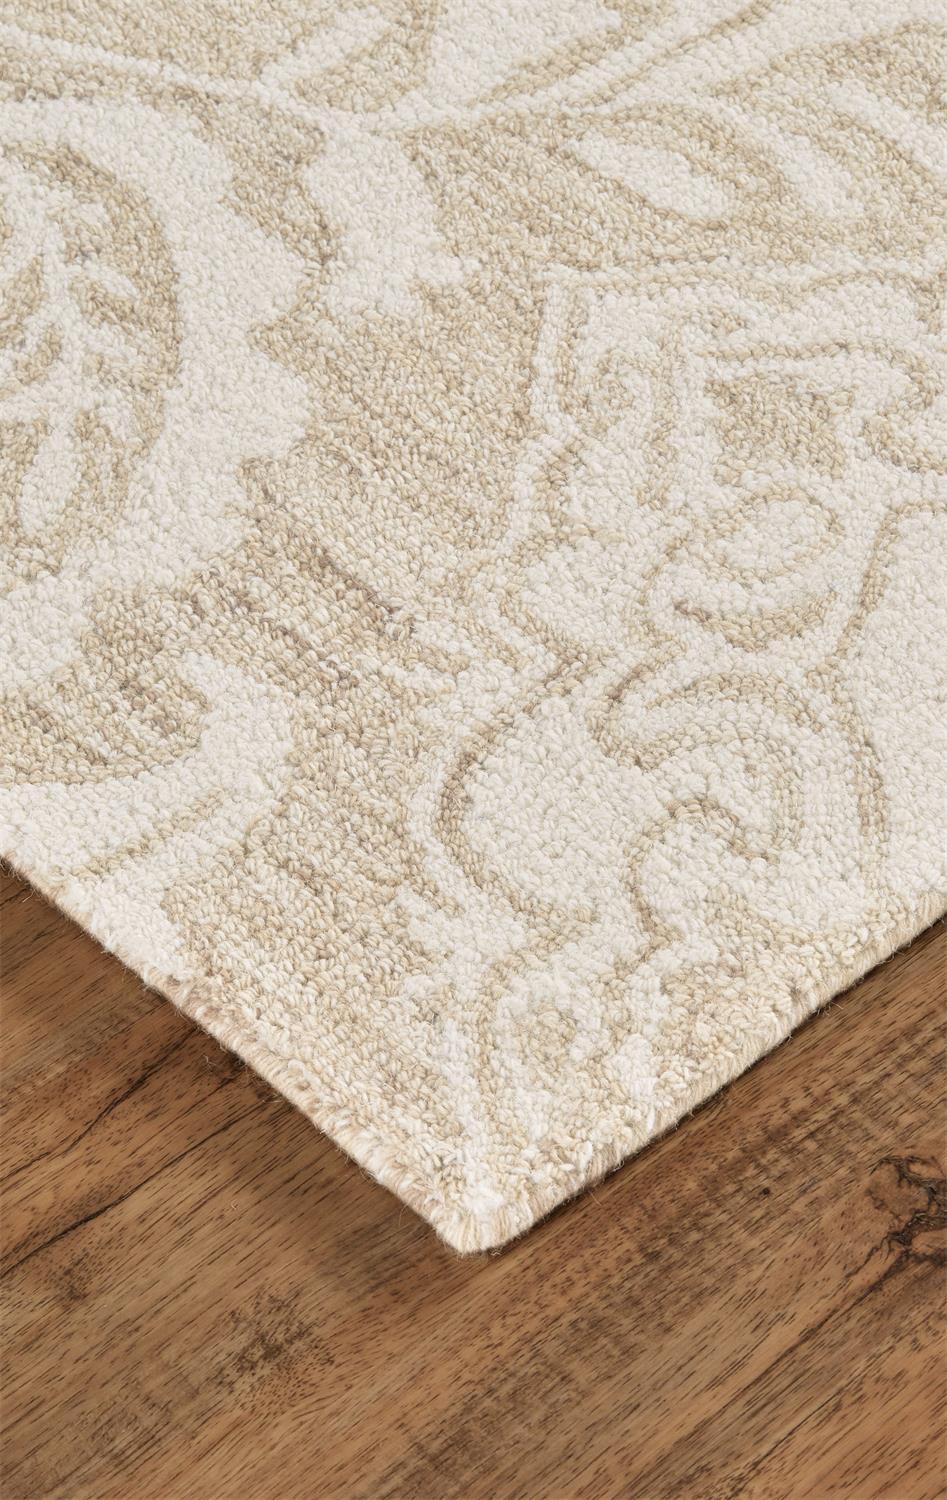 Belfort 8776F Hand Tufted Wool Indoor Area Rug by Feizy Rugs